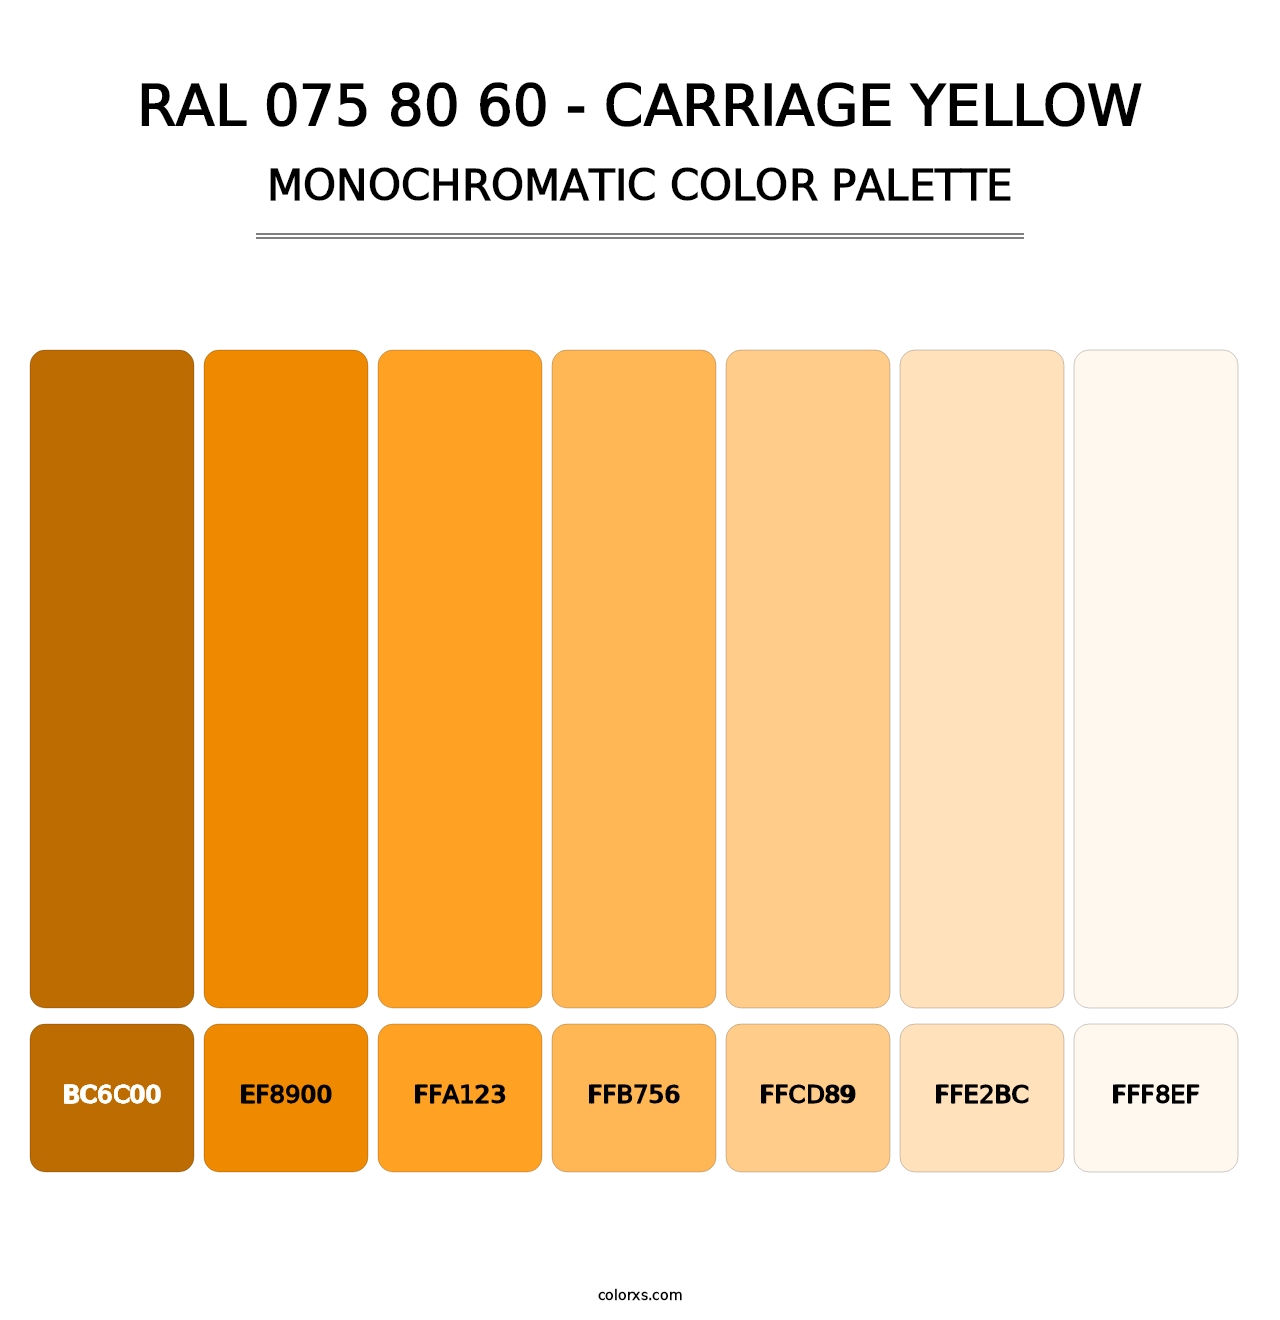 RAL 075 80 60 - Carriage Yellow - Monochromatic Color Palette